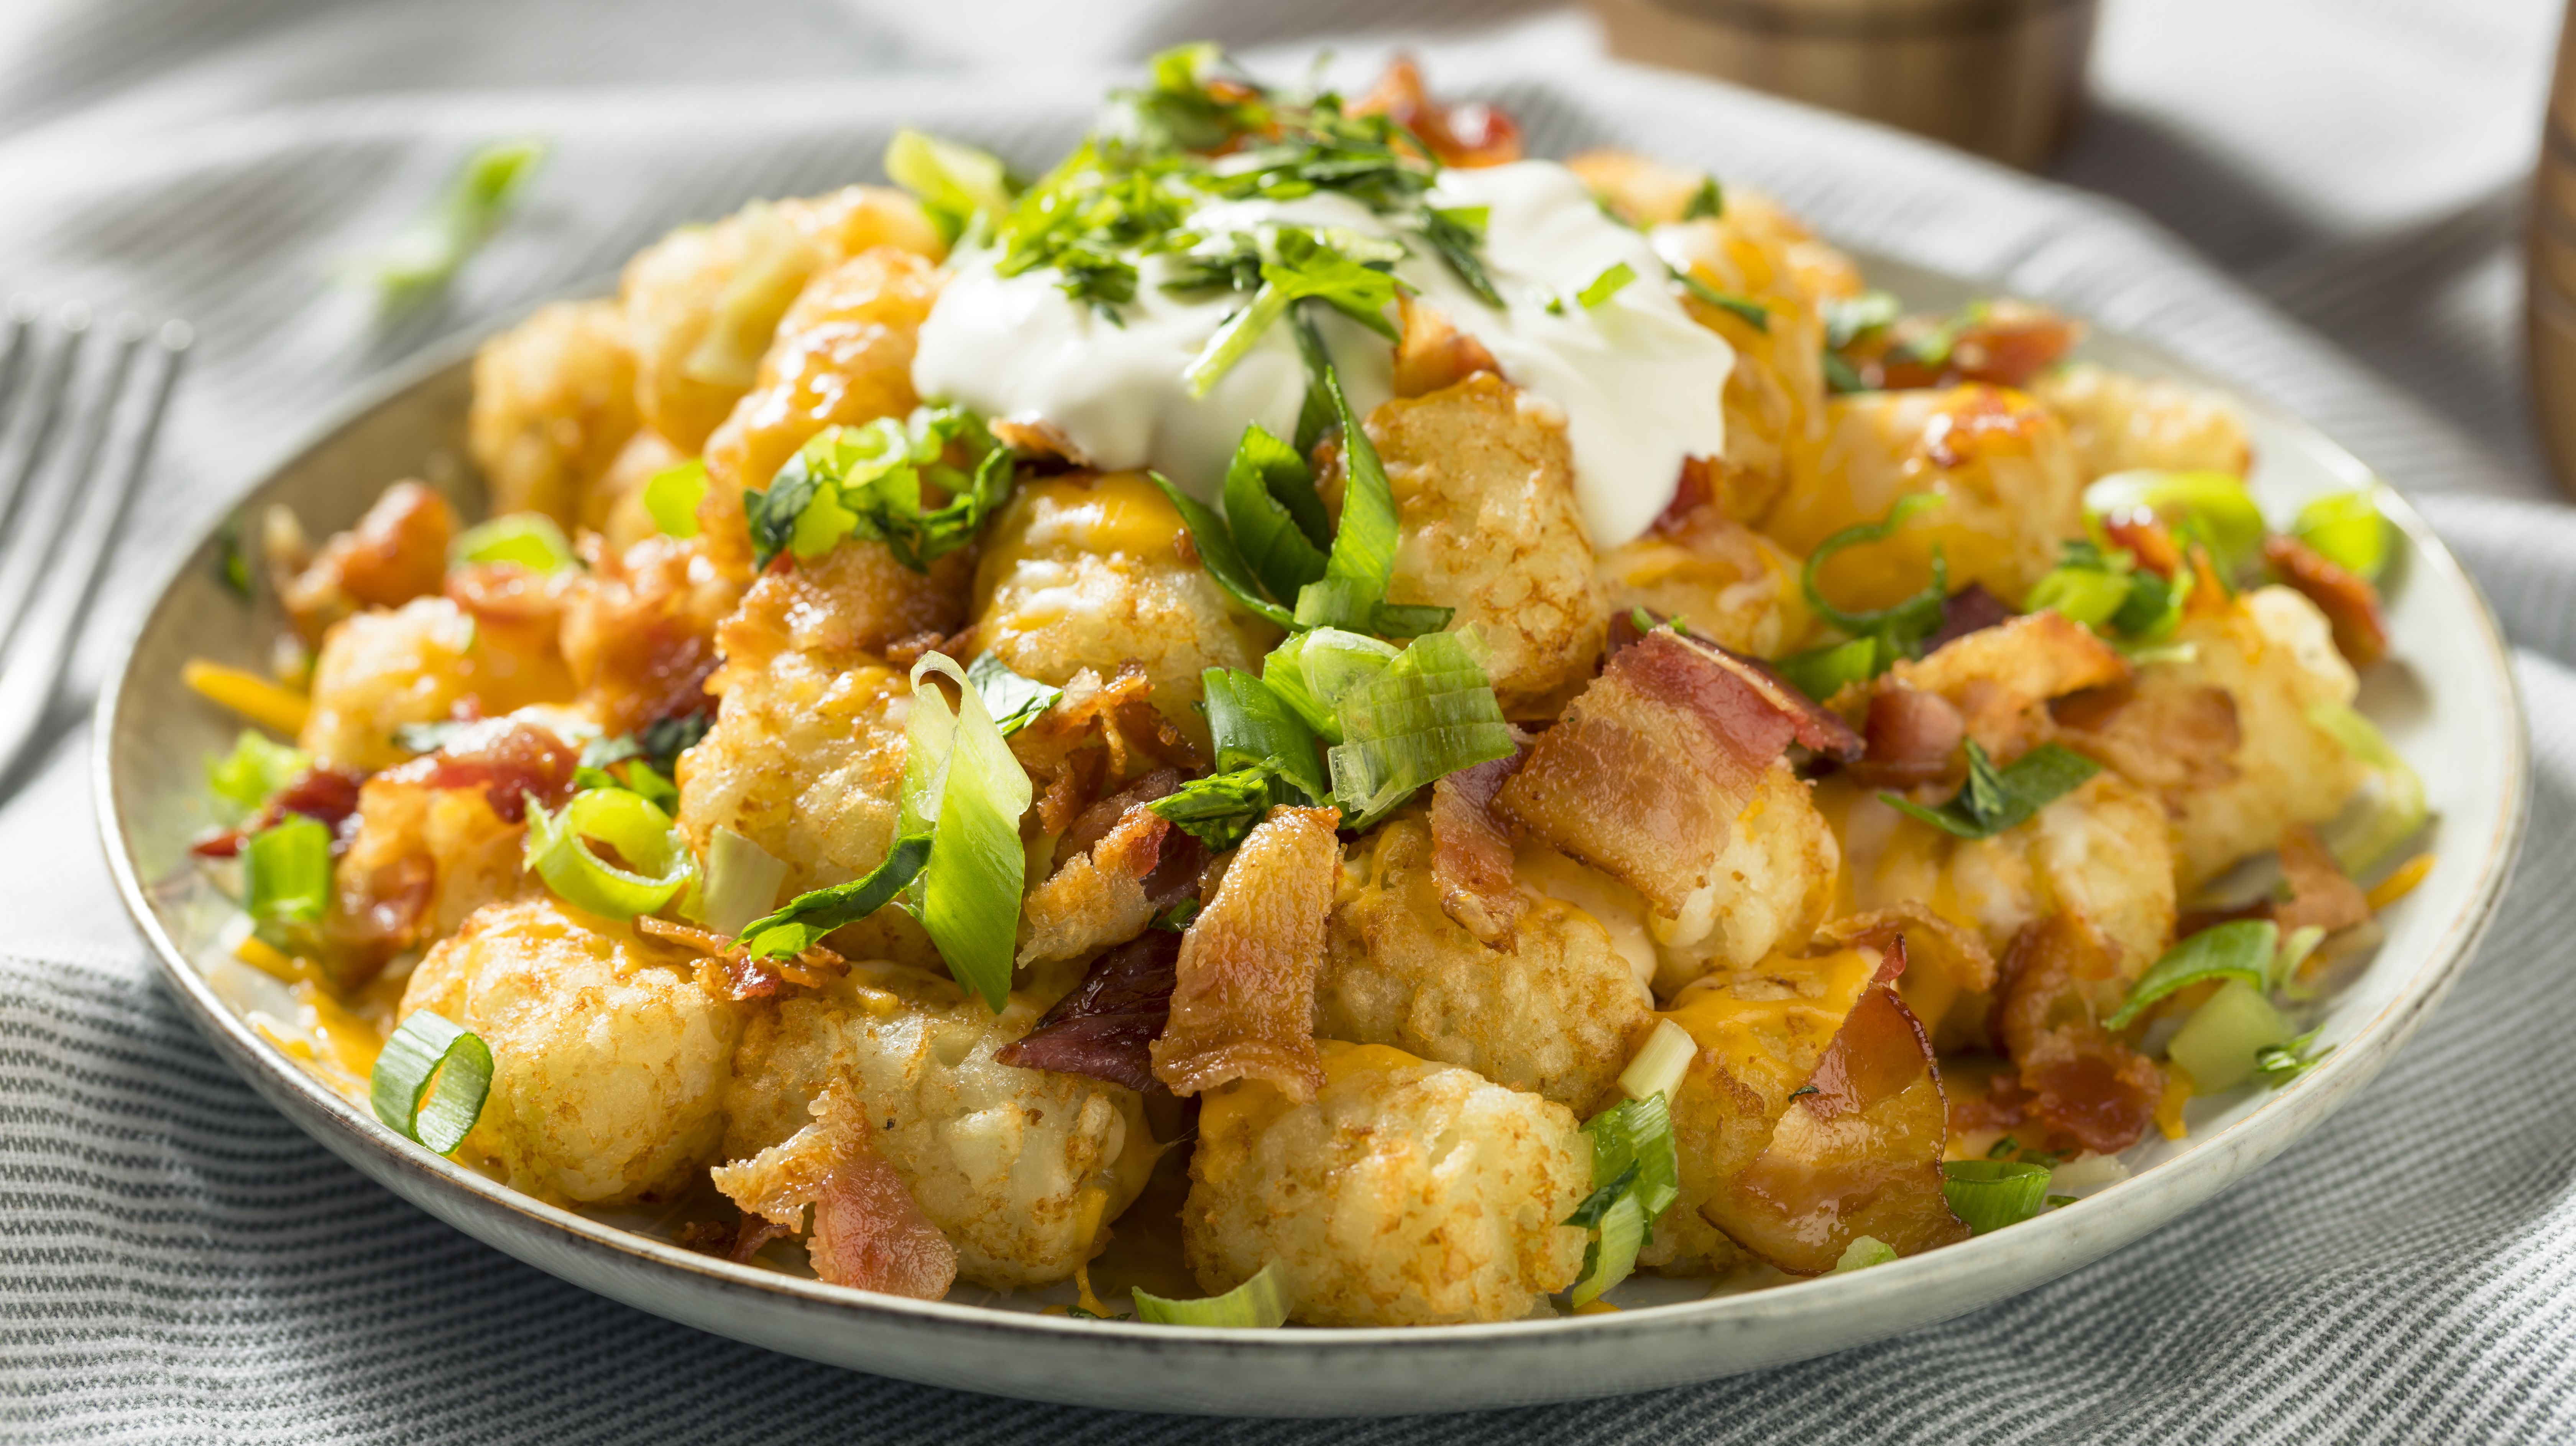 Ontario, Oregon—Birthplace of the Tater Tot—Is Hosting a Tot Fest